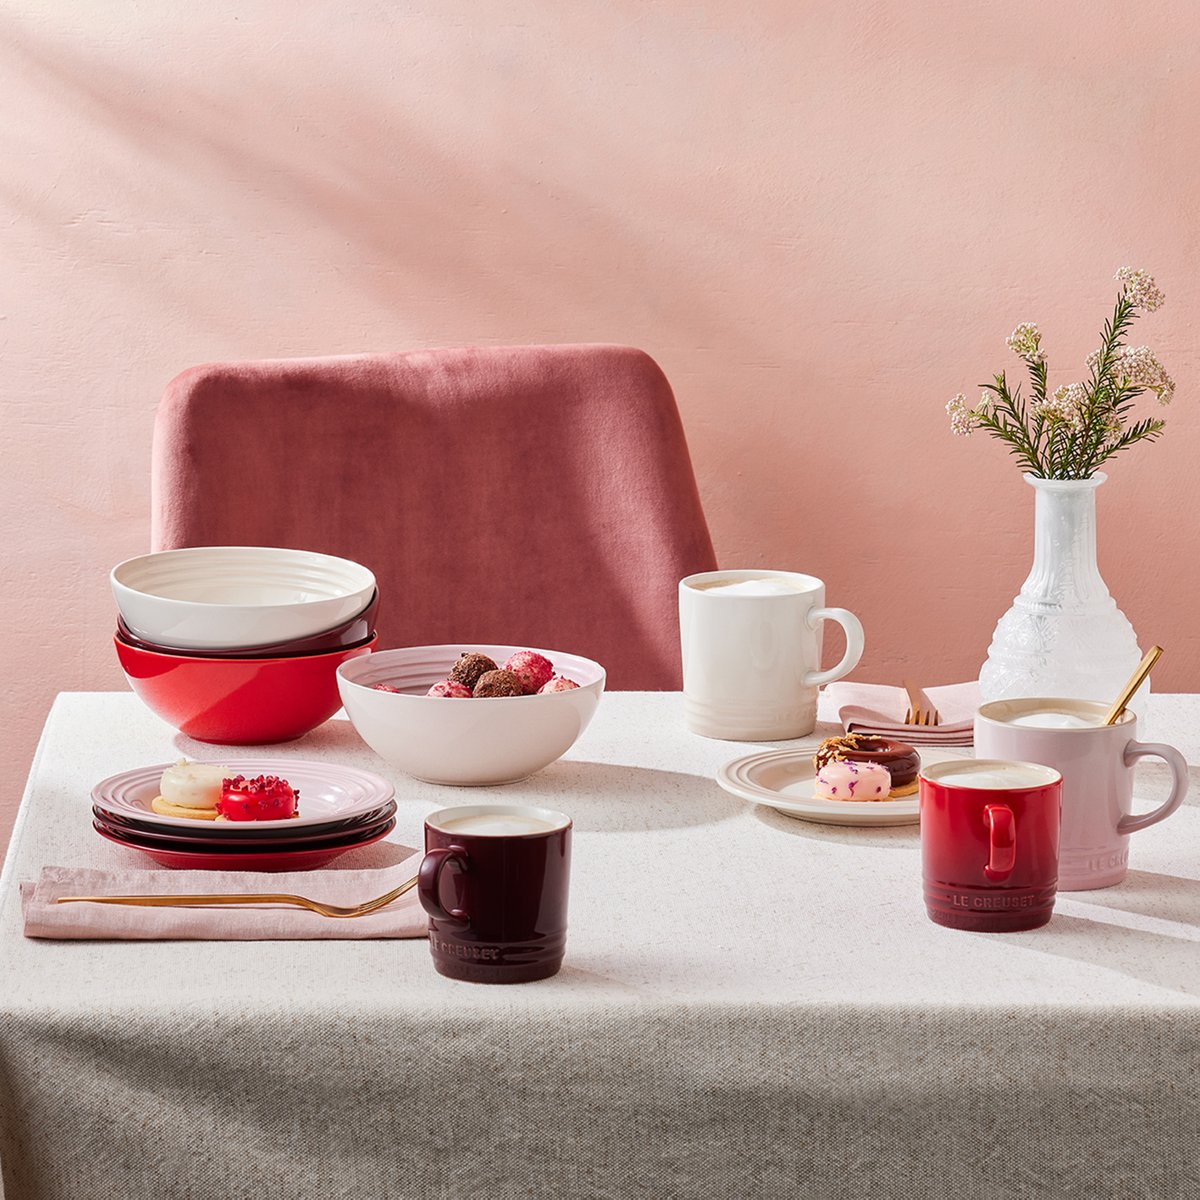 Time's running out! ⏰ Save 25% on Stoneware favourites for a colourful kitchen refresh. 🌈 Shop the Flash Sale in-store or online before April 9th, in-store and online: bit.ly/3dIVMuf